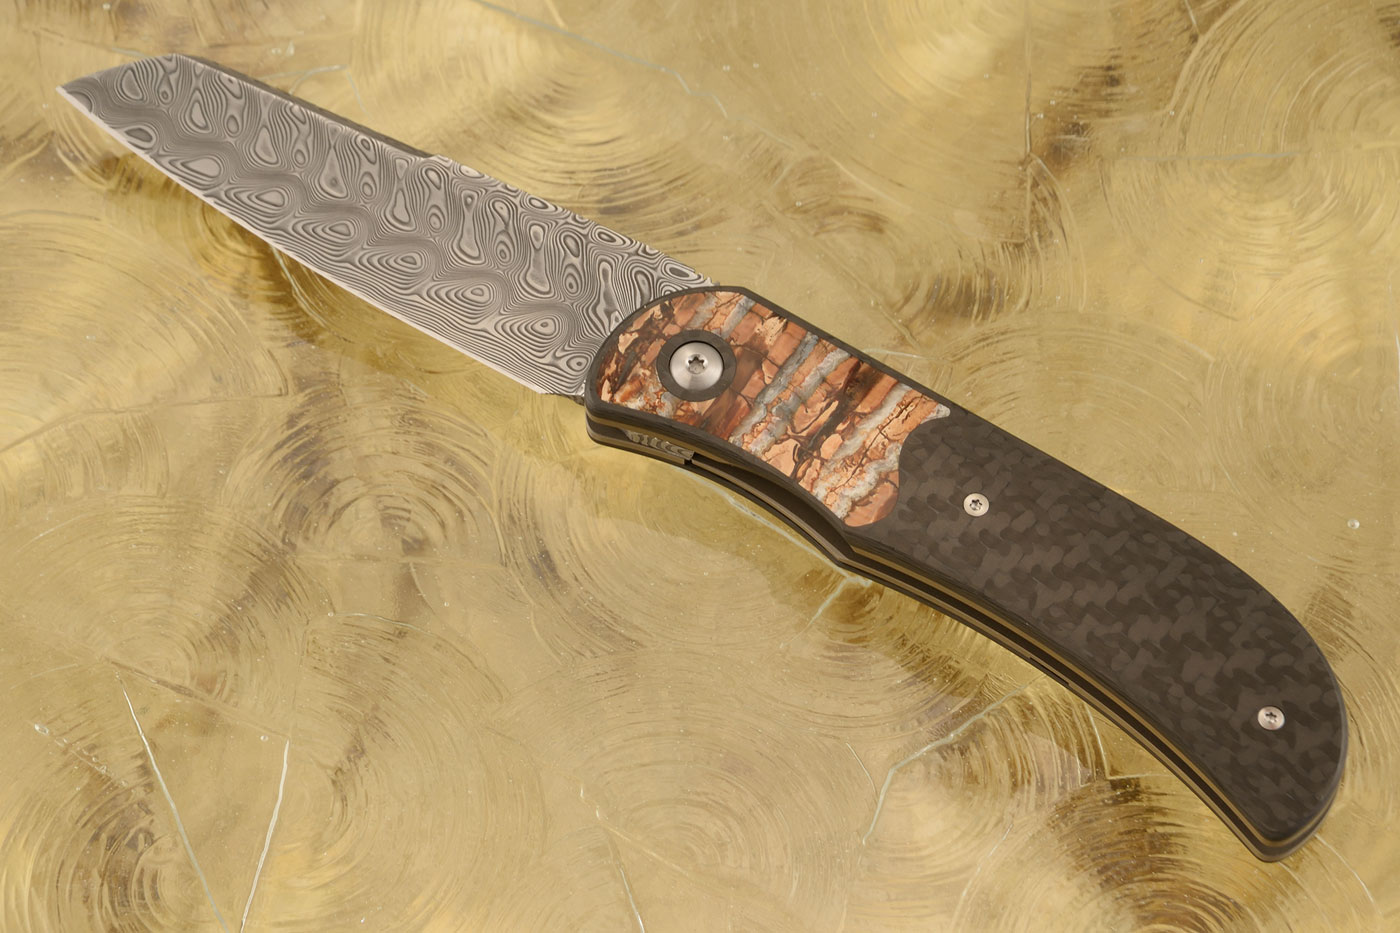 LEXK Plus Front Flipper with Carbon Fiber and Mammoth Molar - Damasteel